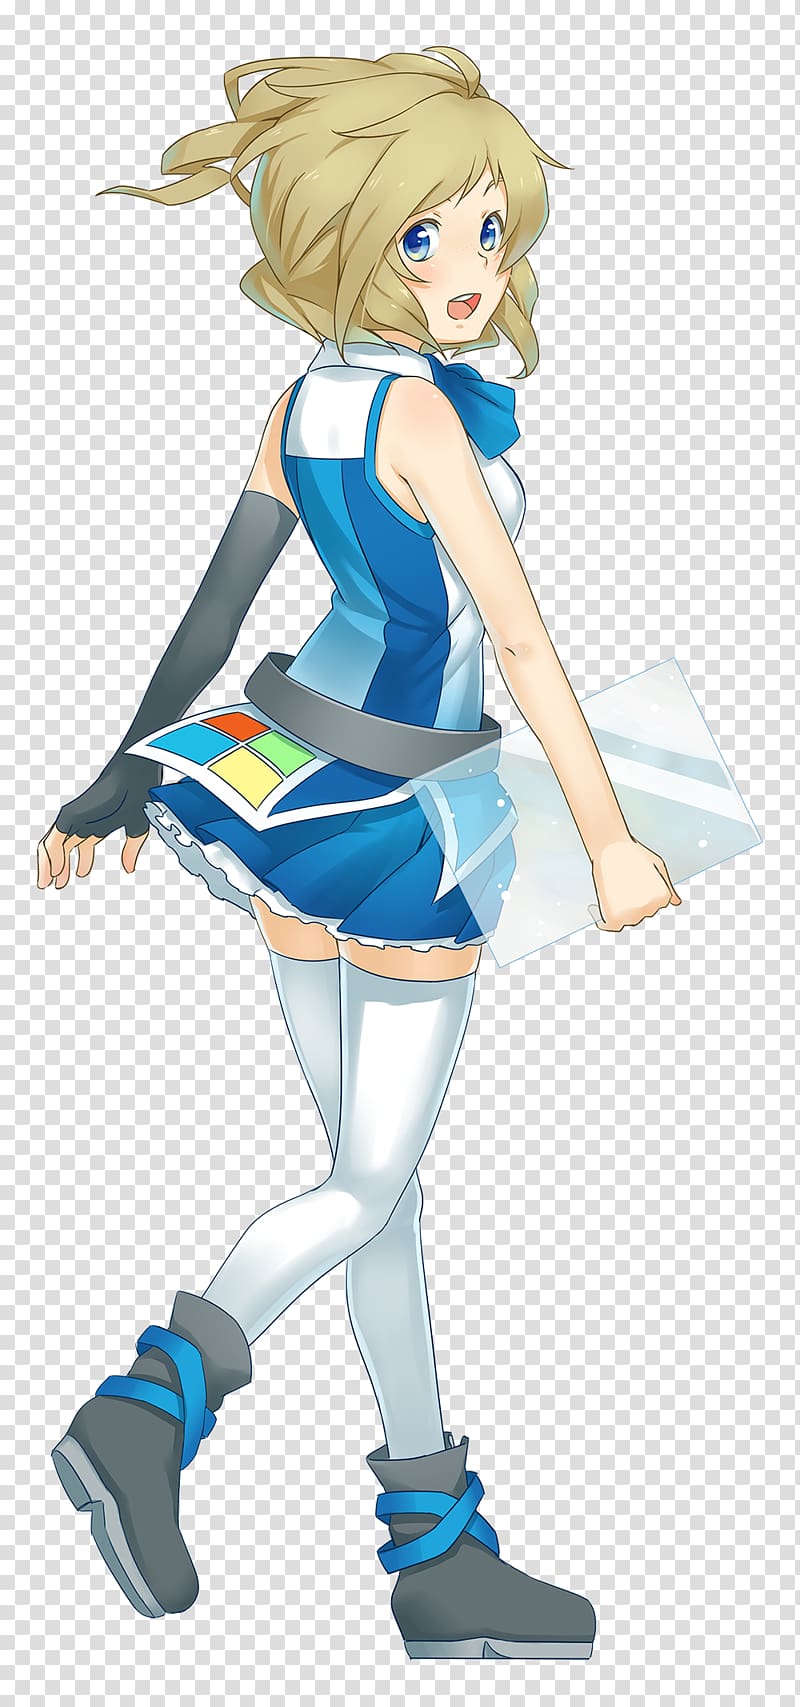 OS-tan Windows XP Operating Systems, Anime transparent background